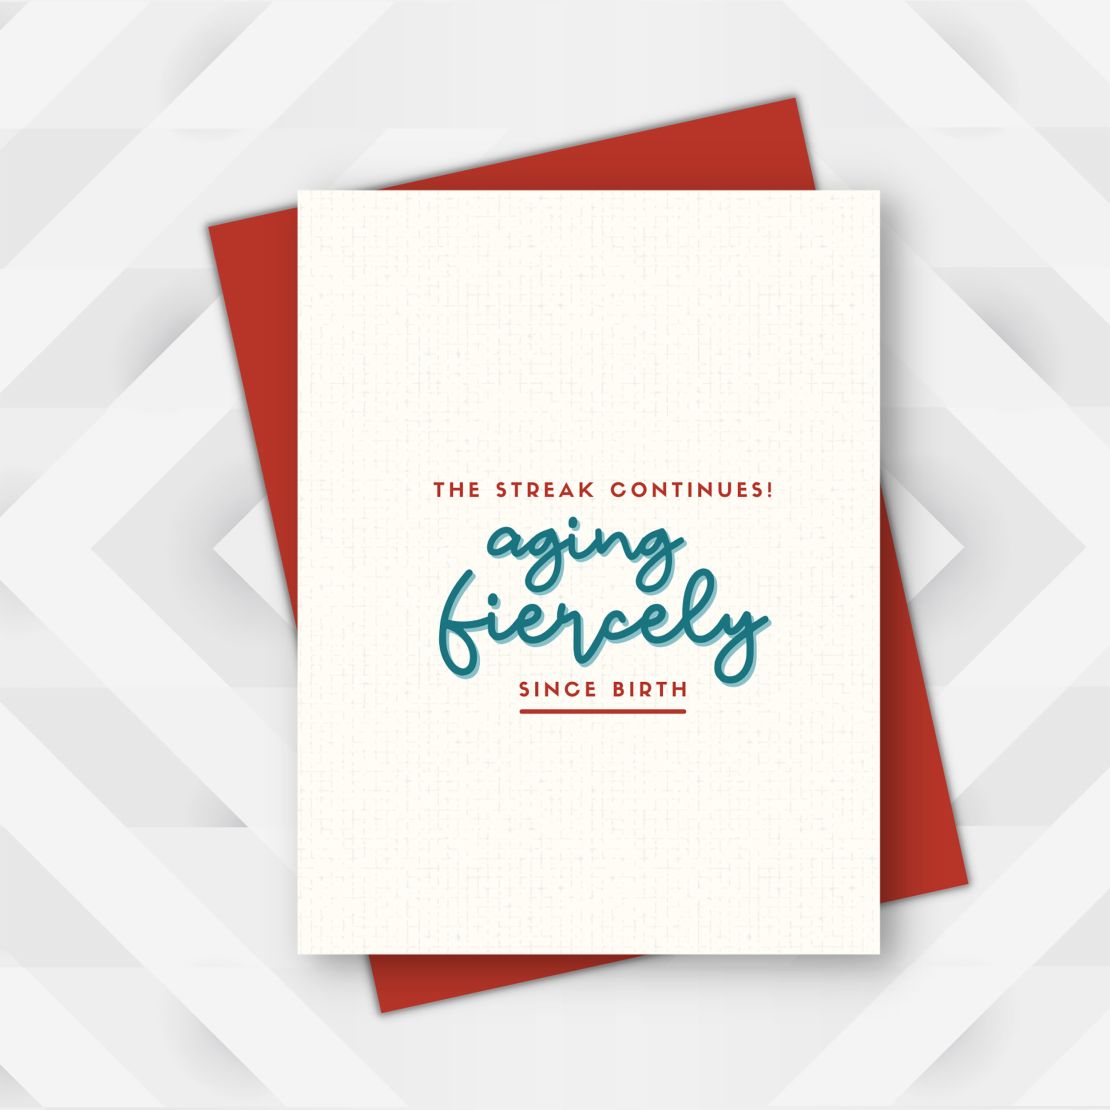 Golden says she designs cards that "flip the script" to change the way we talk about aging.